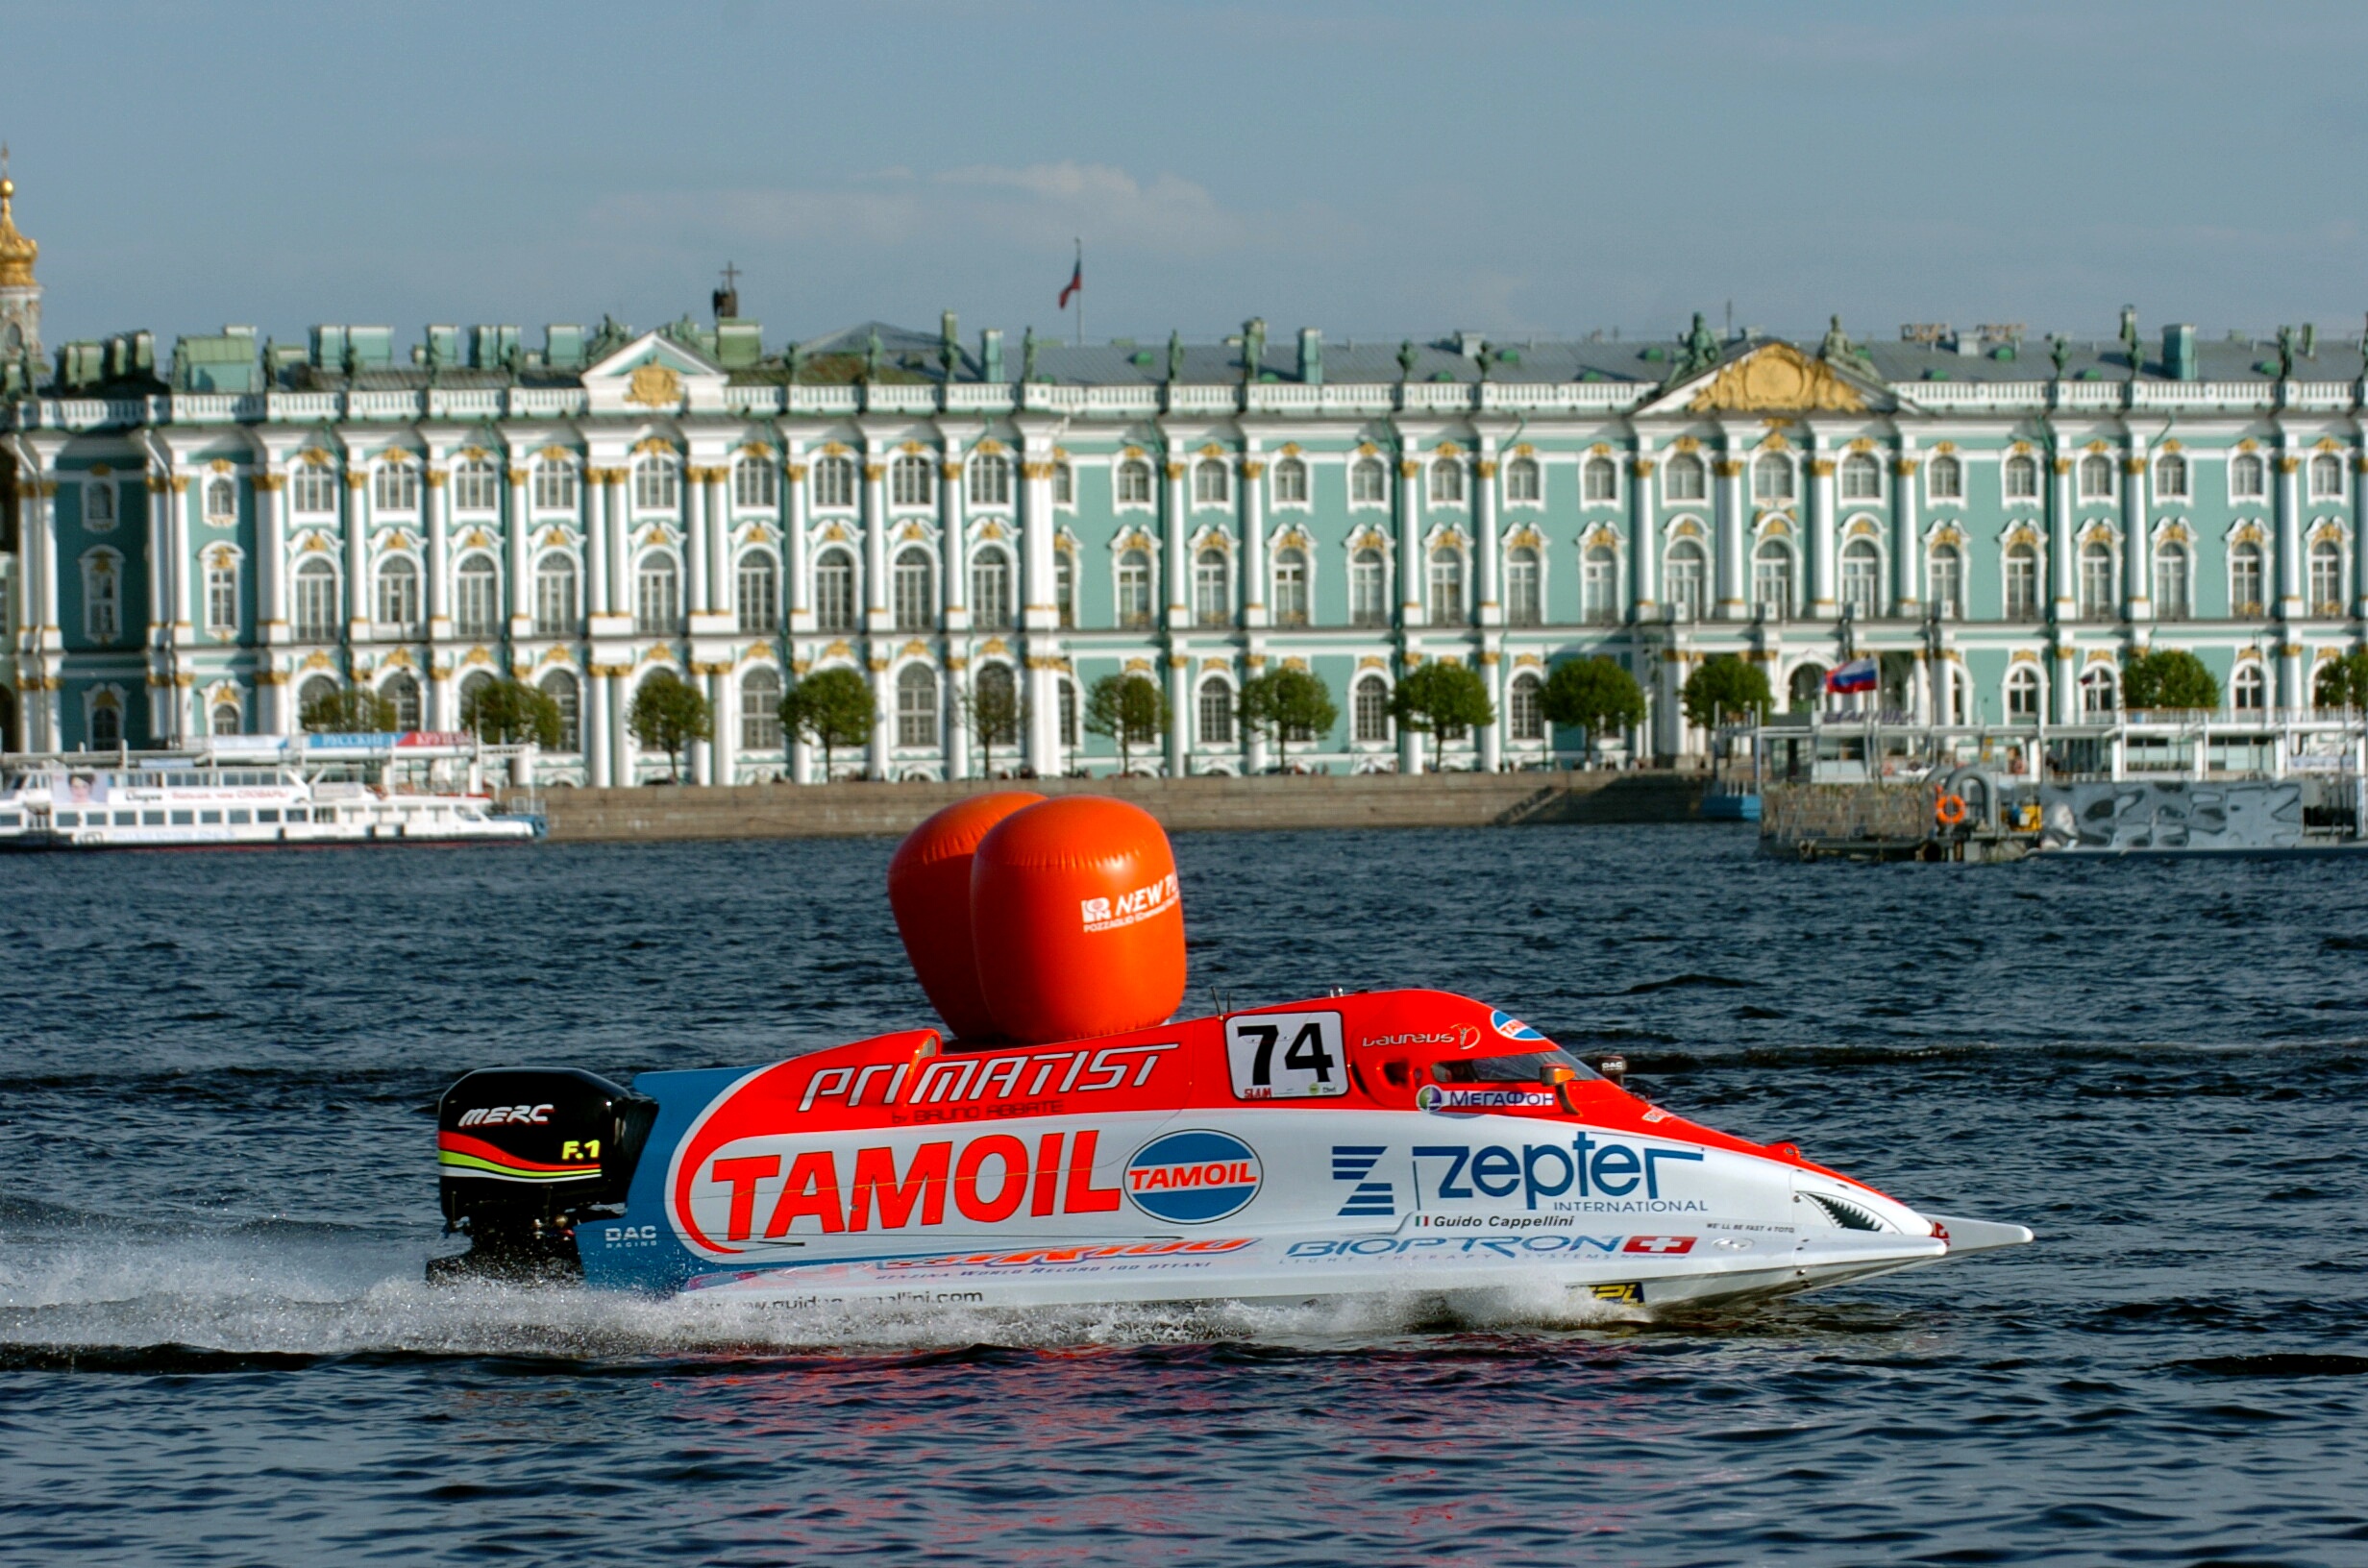 St Peterburg - Russia - 13 June, 2008 - First  free practice for the Russian Grand Prix on Neva River in St Peterburg. In this photo Guido Cappellini of Team Tamoil. This GP is the 4th leg of the UIM F1 Powerboat World Championship 2008. Picture by Vittorio Ubertone/Idea Marketing.